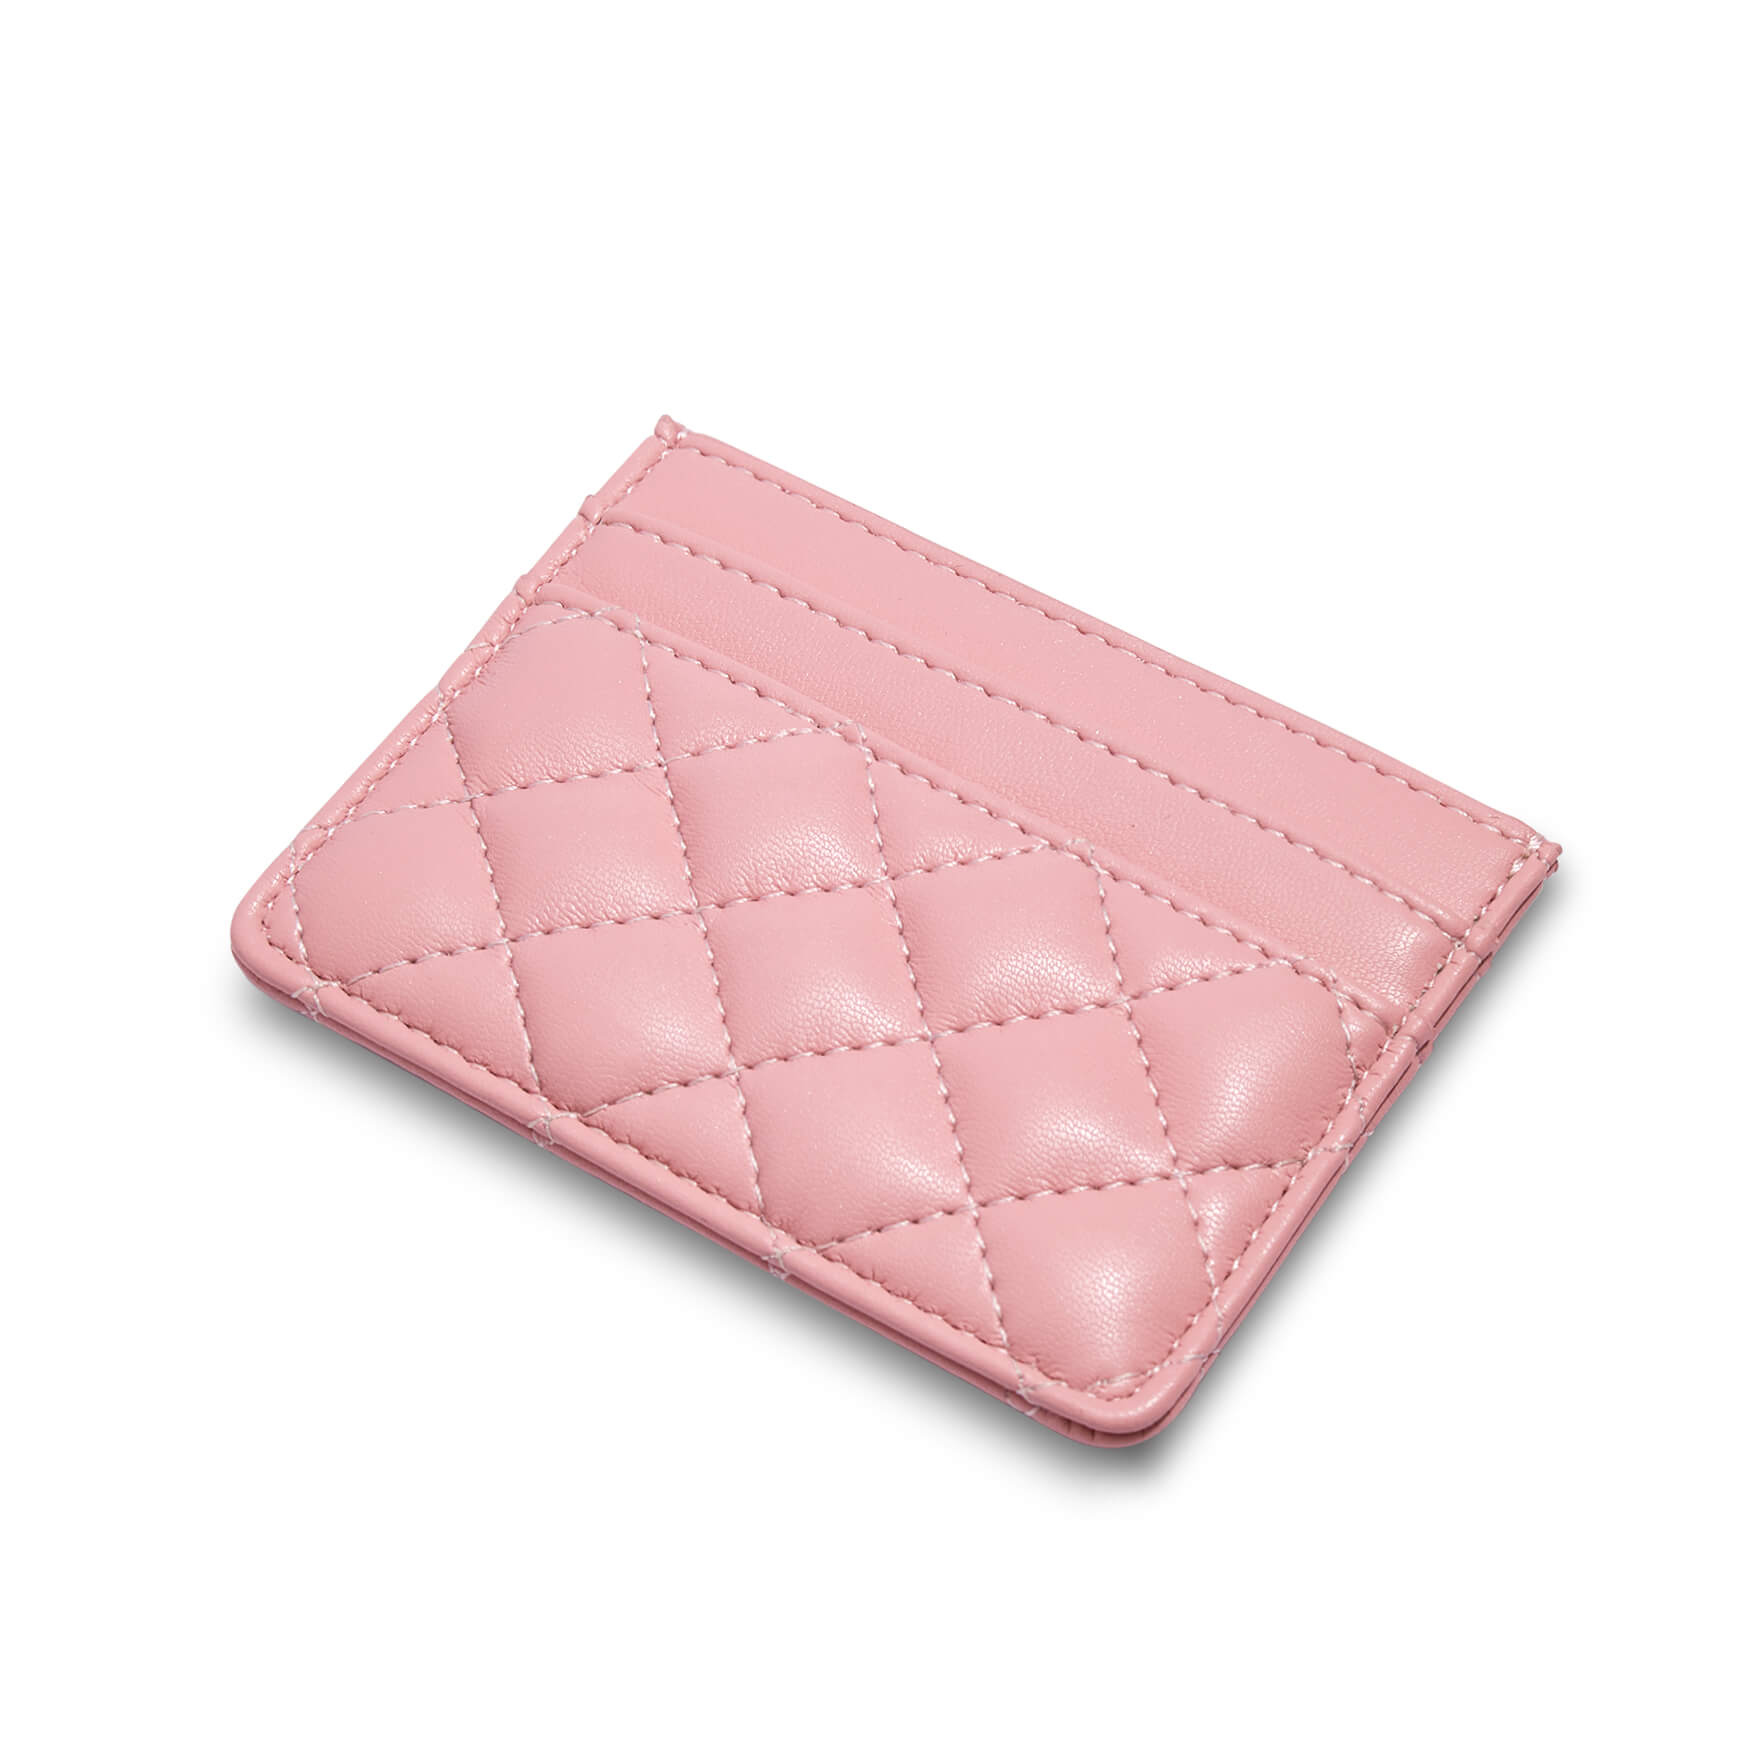 SINBONO Luxury Business Card Case Holder Pink - Cruelty Free Leather Purse